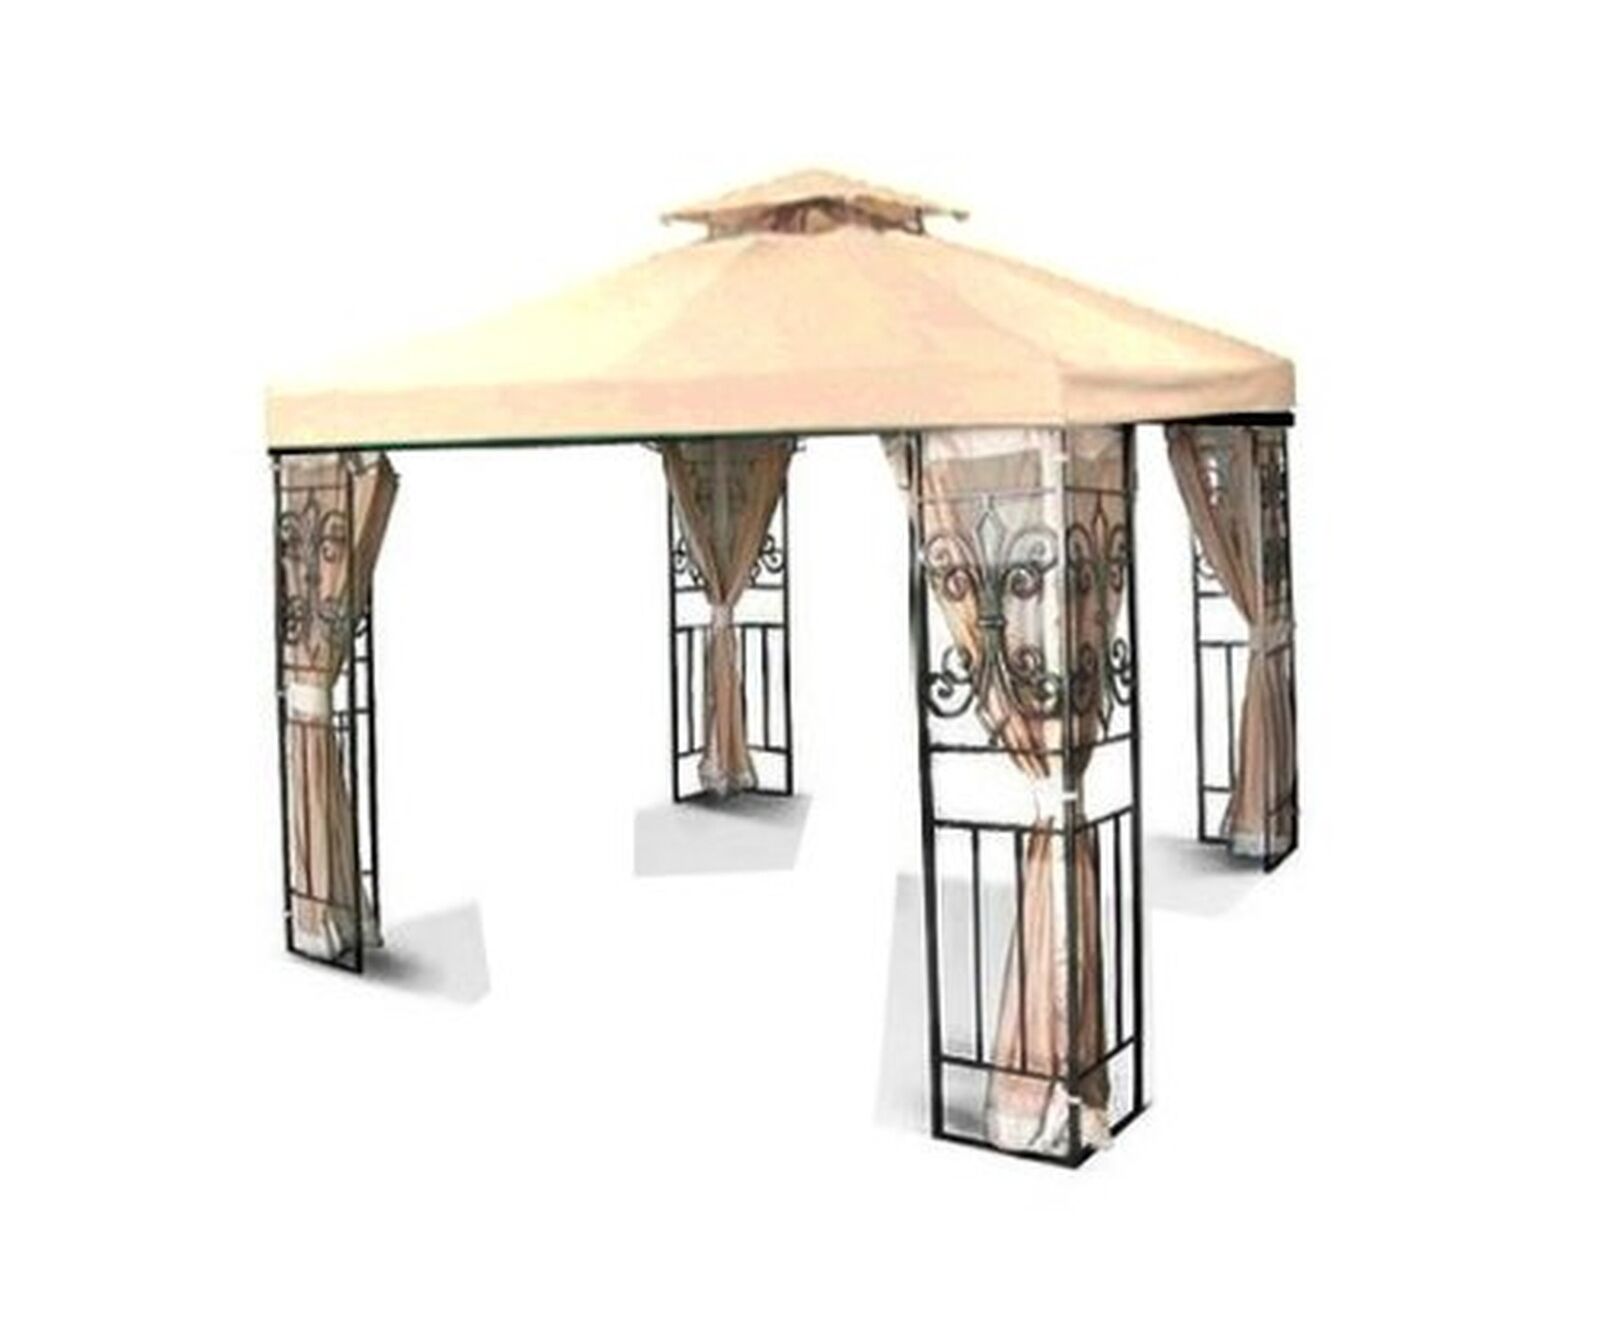 GH 10' X 10' Gazebo Replacement Canopy Top Cover - Beige, Double-teir